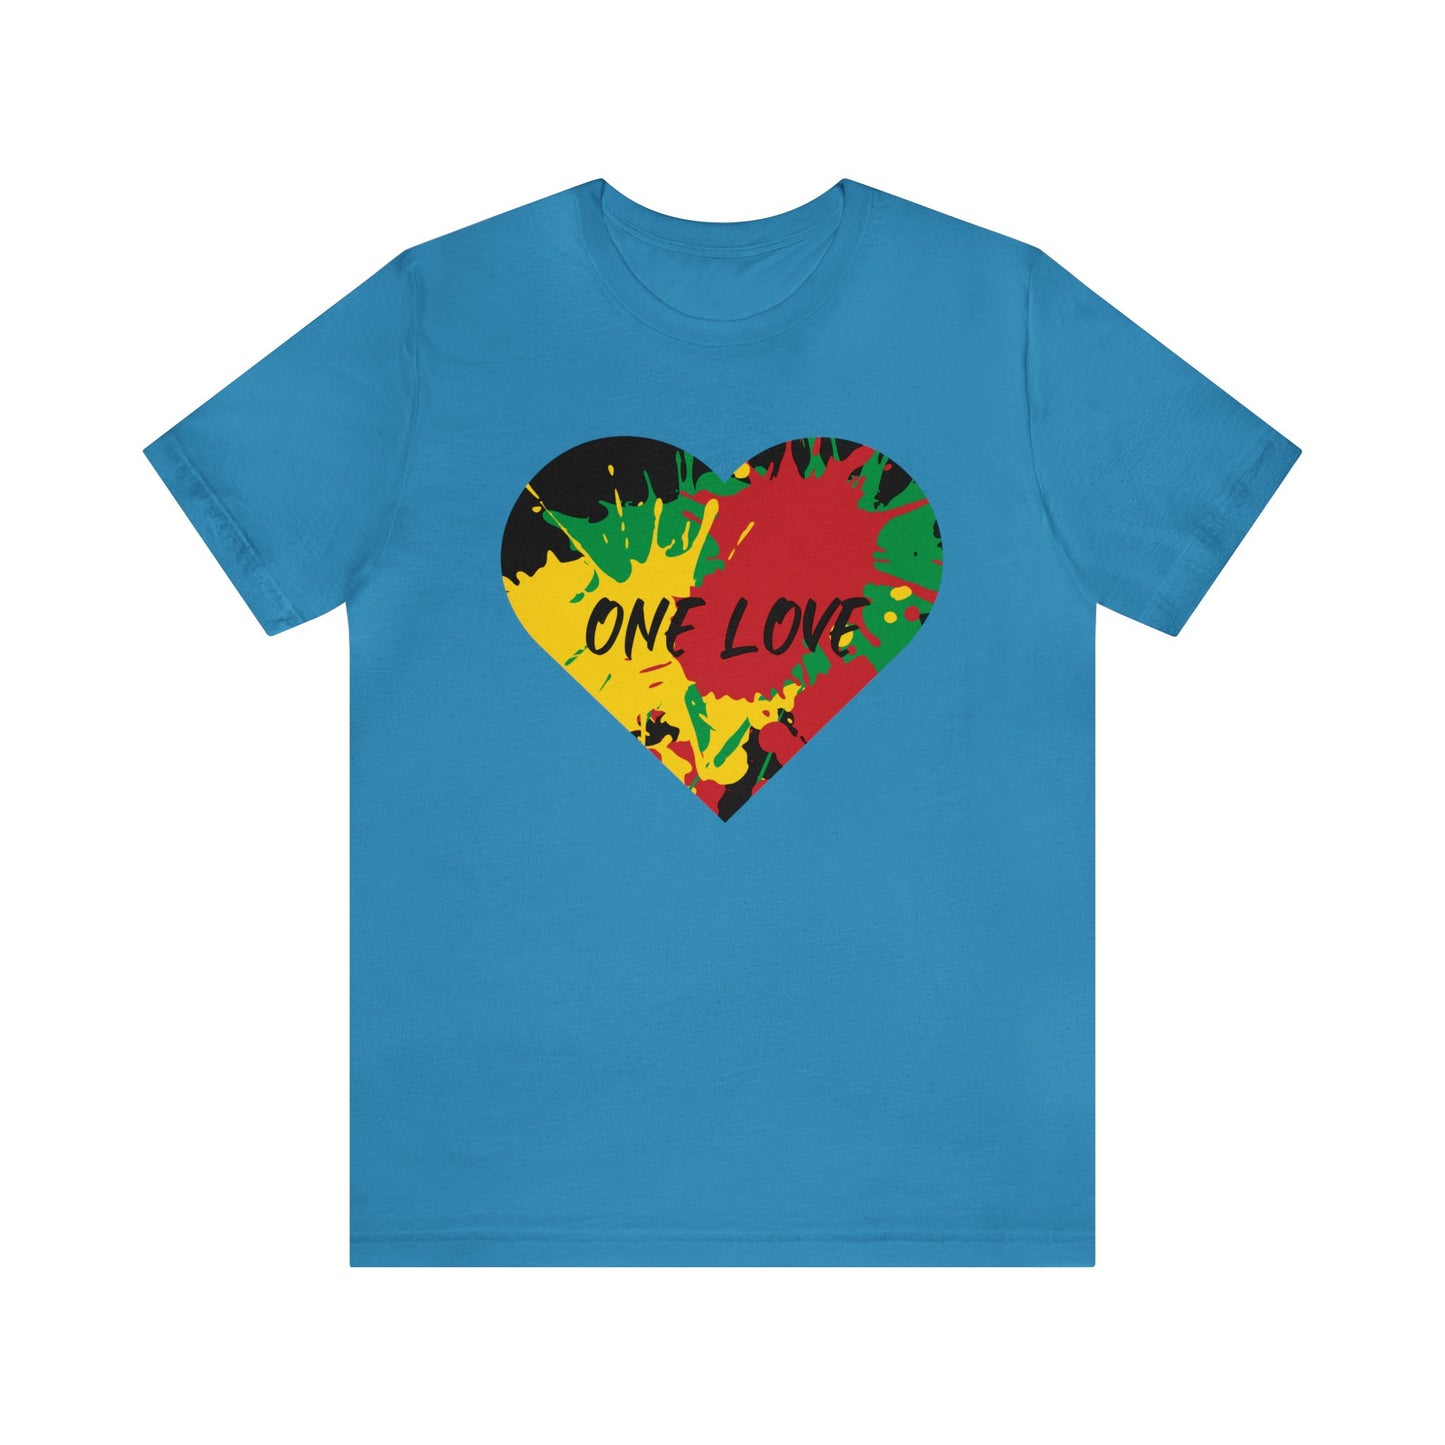 ONE LOVE GRAPHIC ROOTS ART DESIGN TEE SHIRT